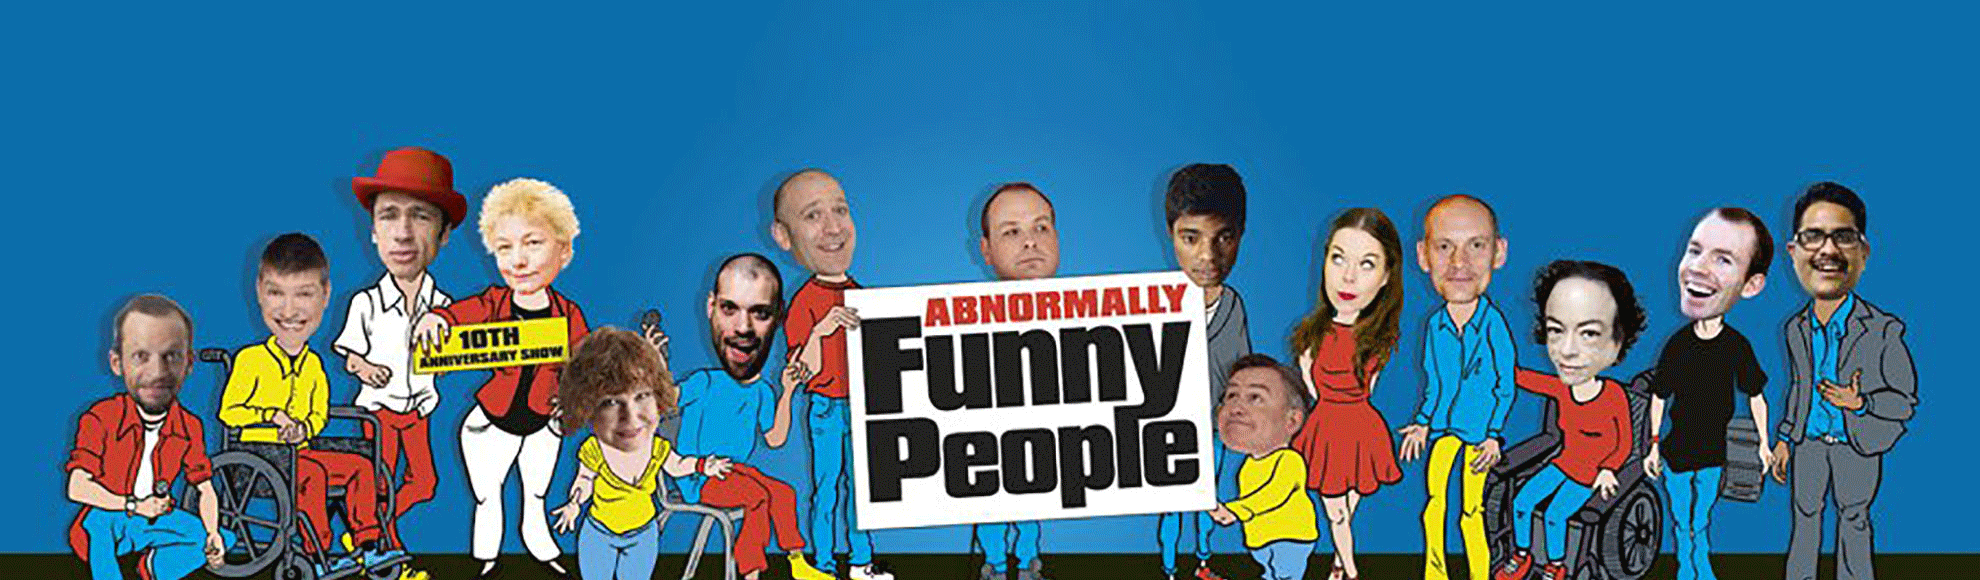 Abnormally funny people